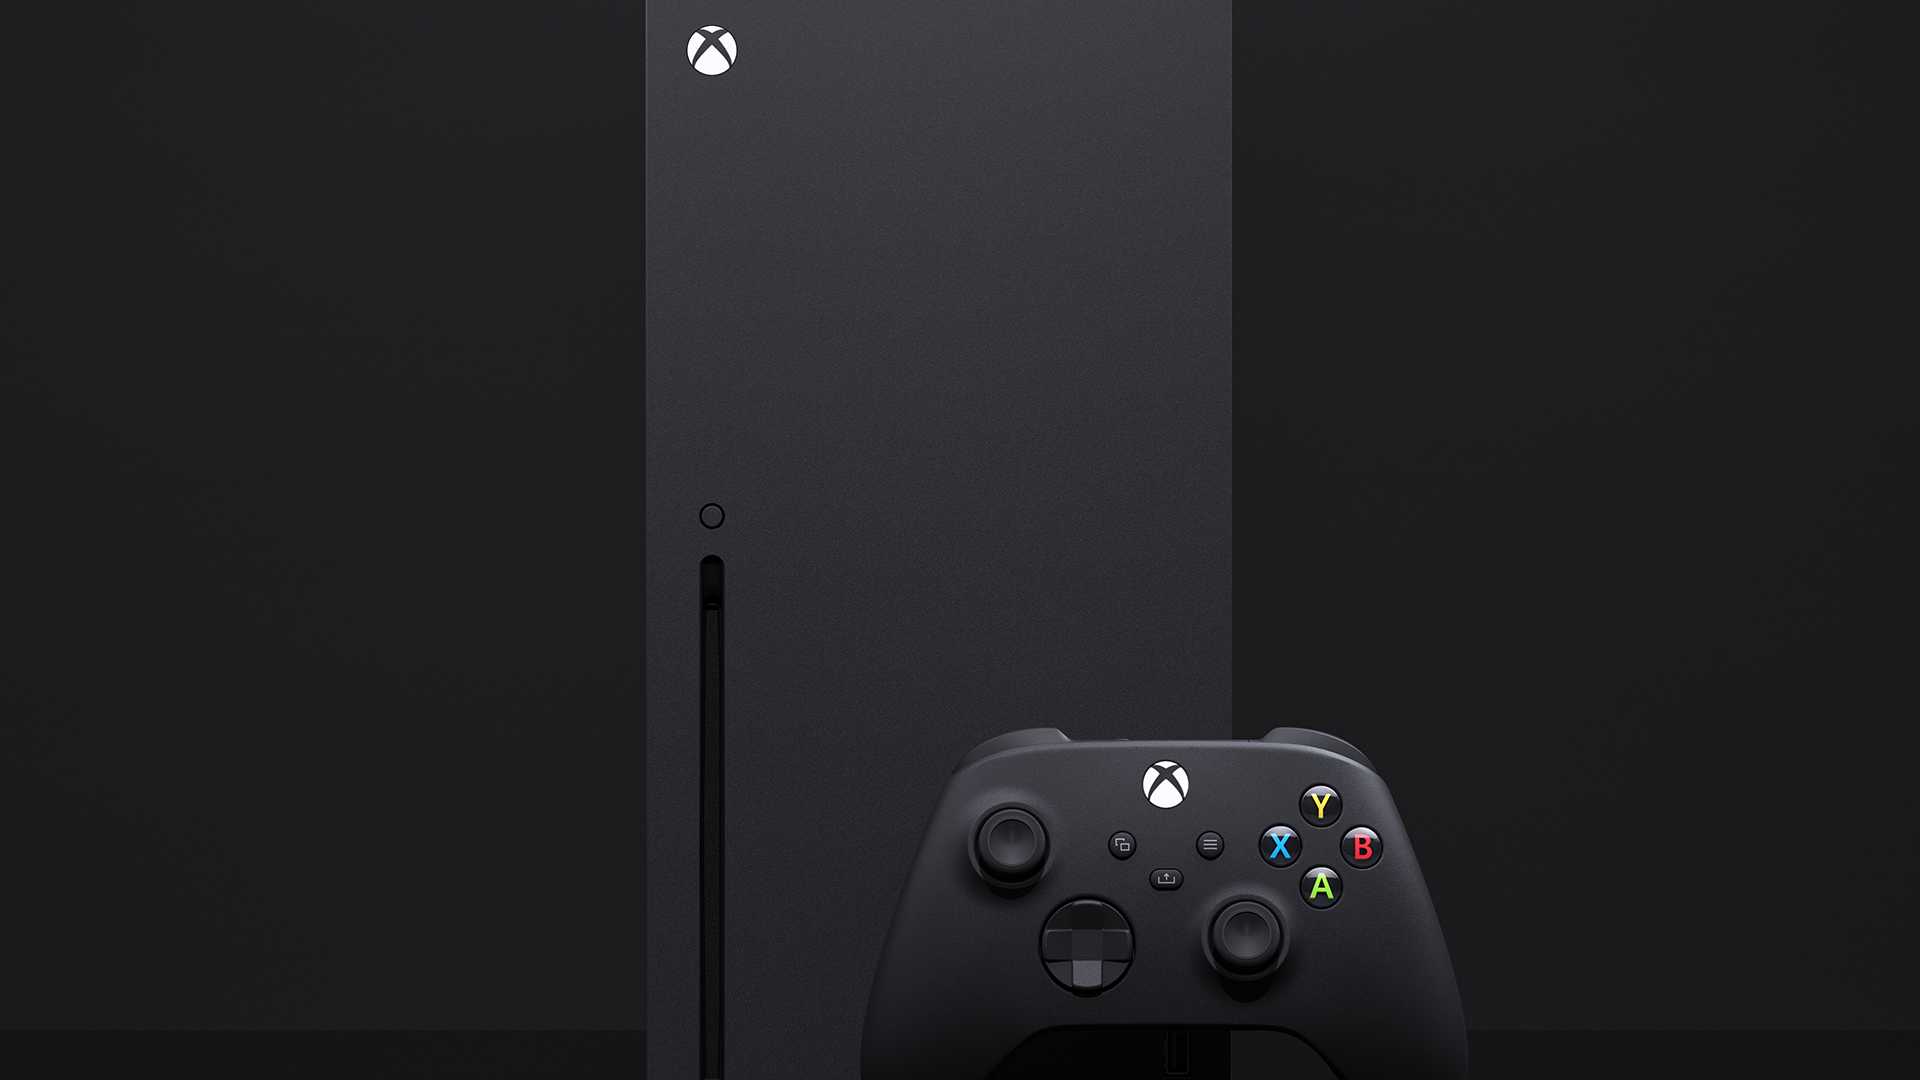 Insiders: Xbox Series X may be accidentally downgrading some Xbox One X games